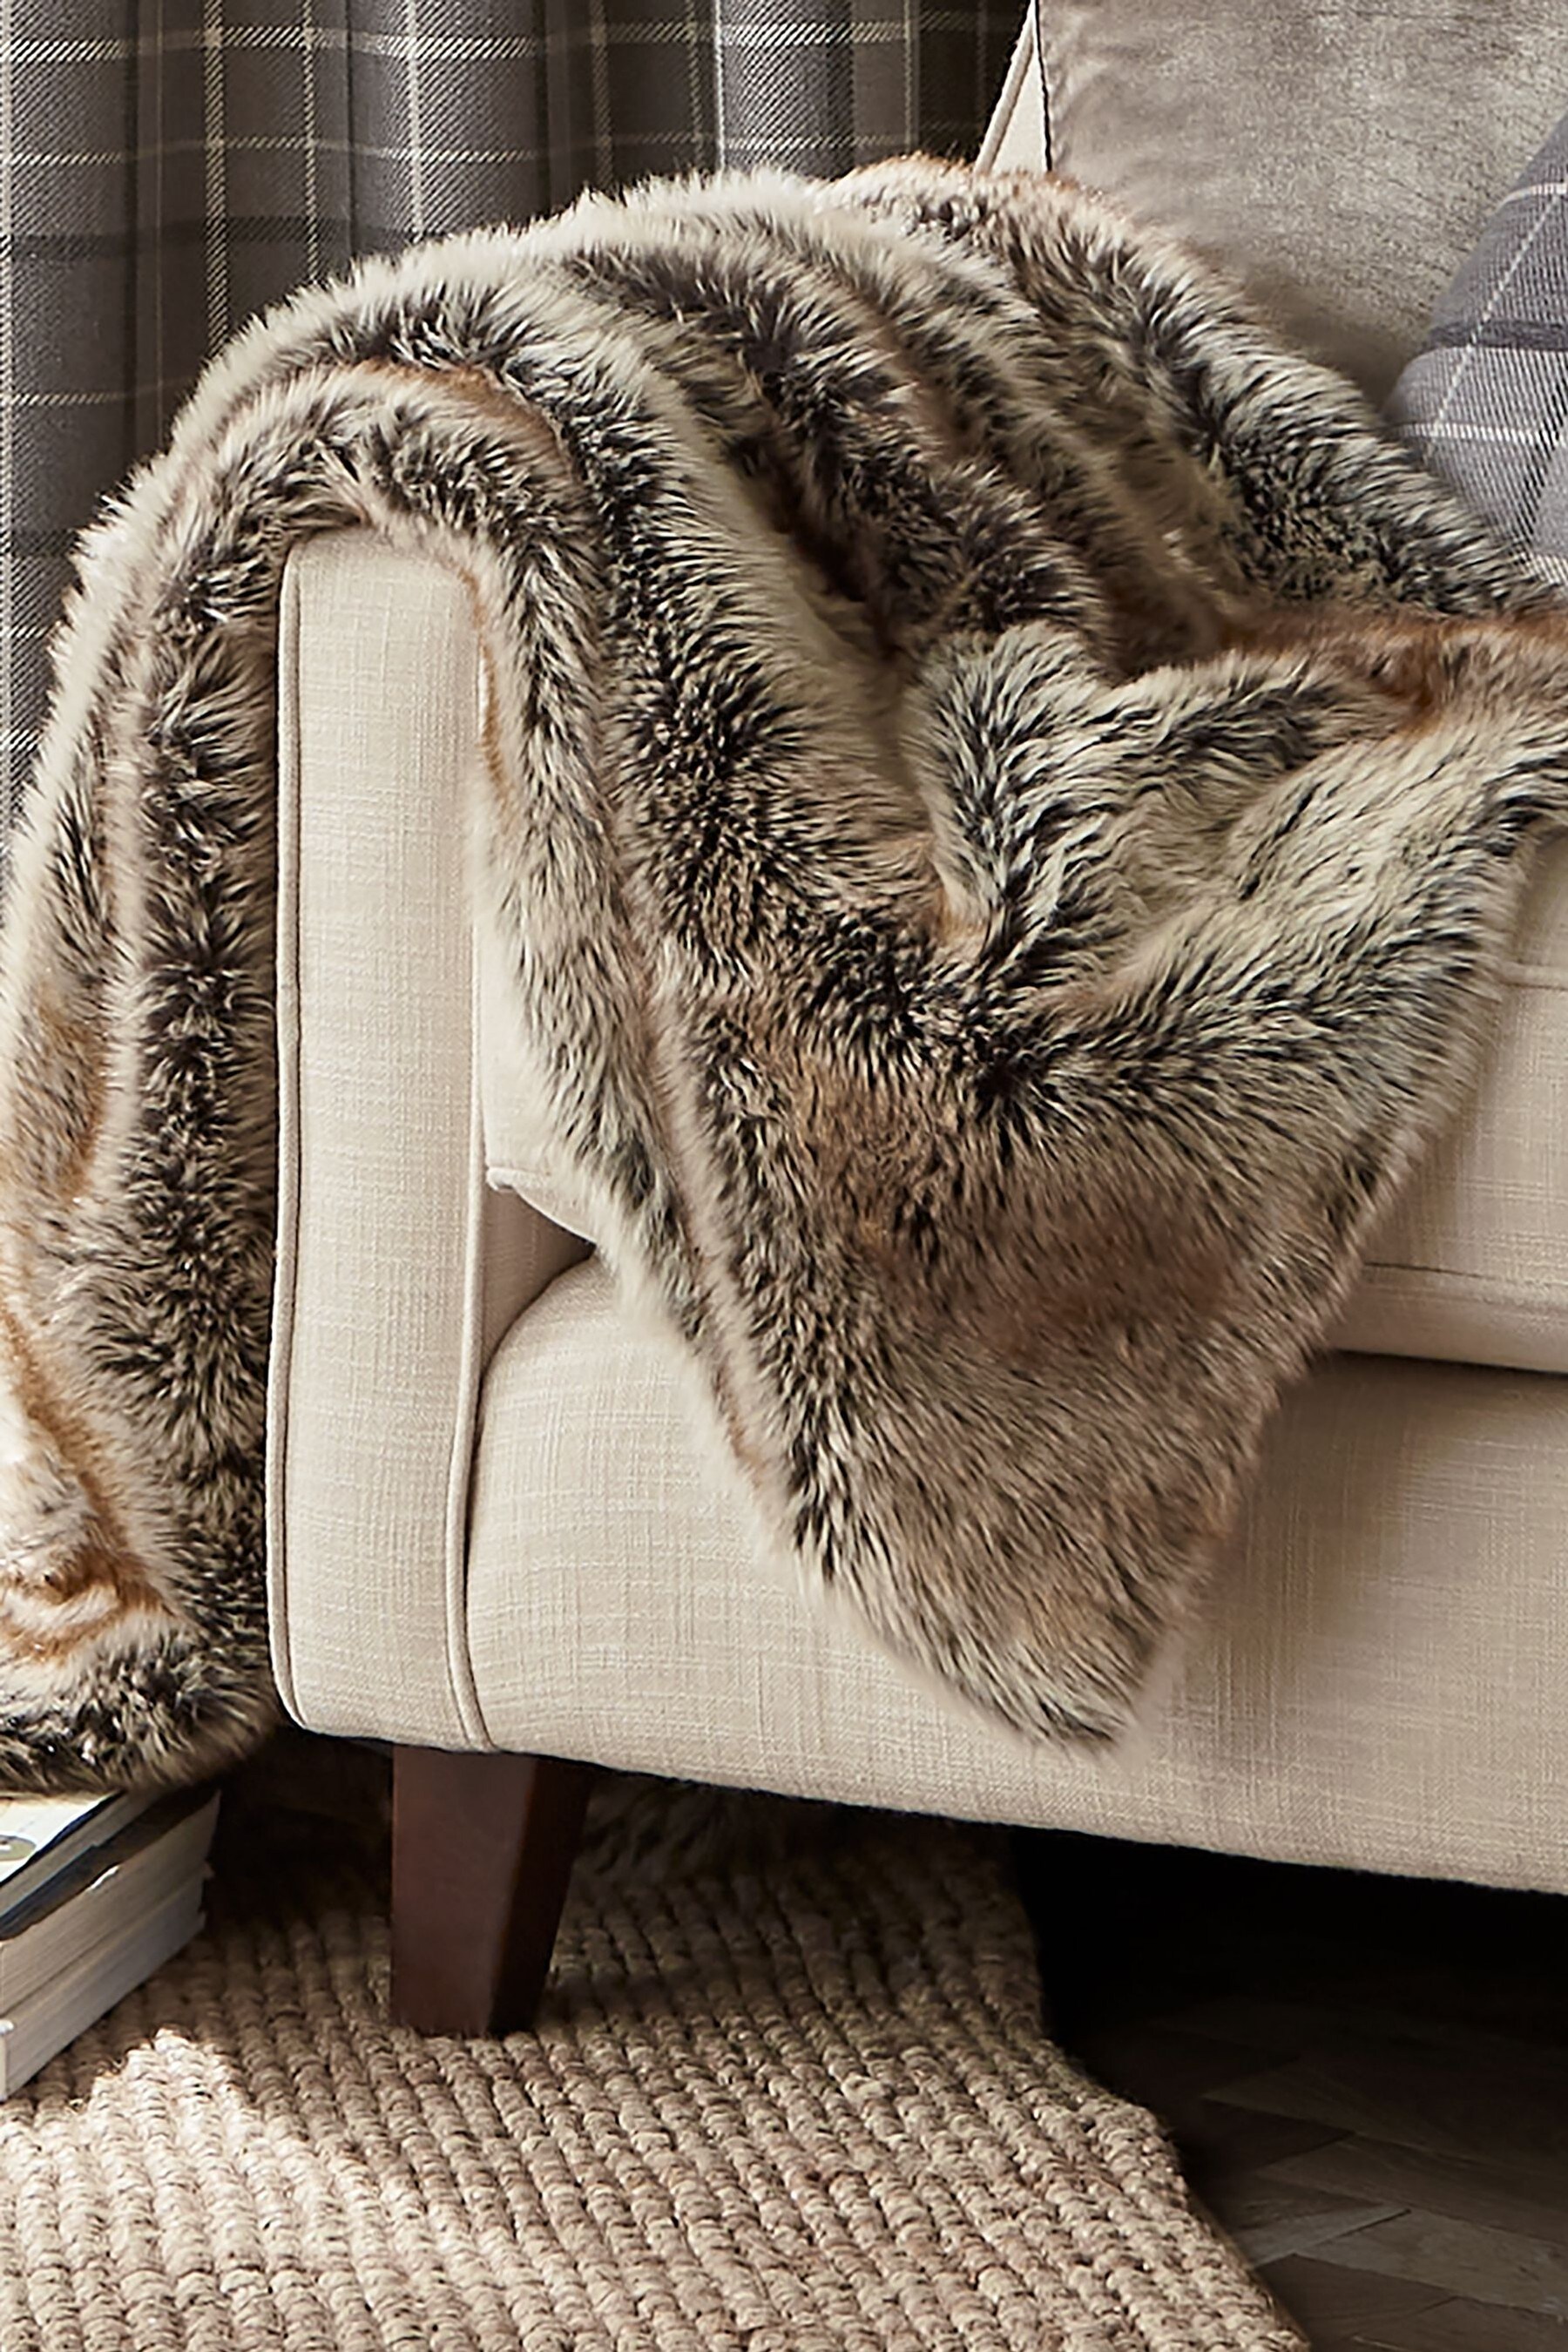 Buy Laura Ashley Chocolate Hexham Faux Fur Throw from the ...